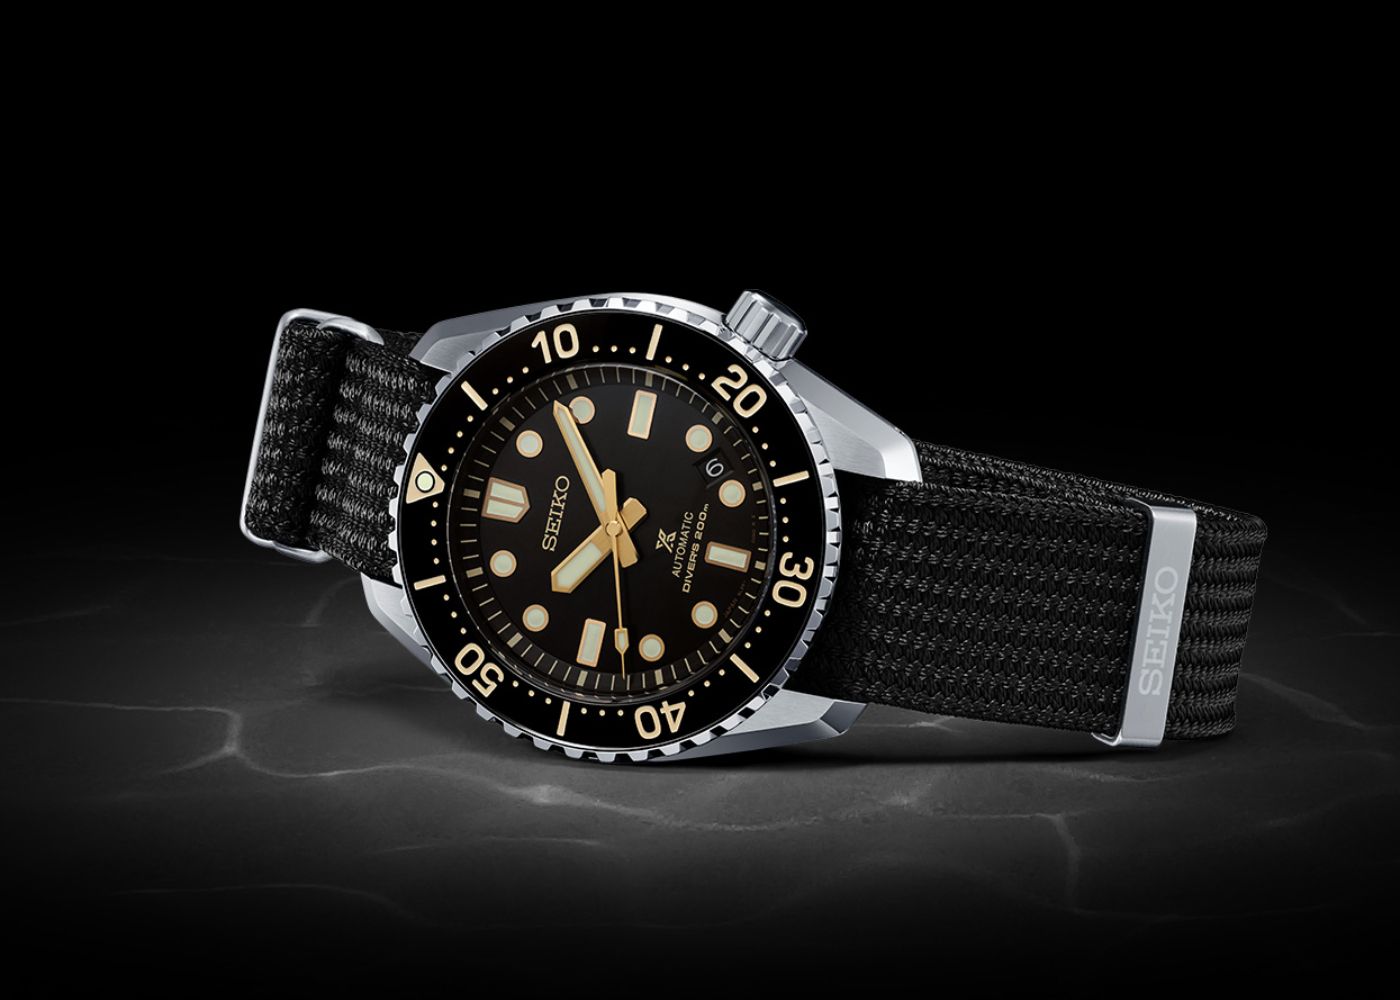 The Upgraded Seiko Prospex Dive Watch Is Fit For An Antarctic Adventure